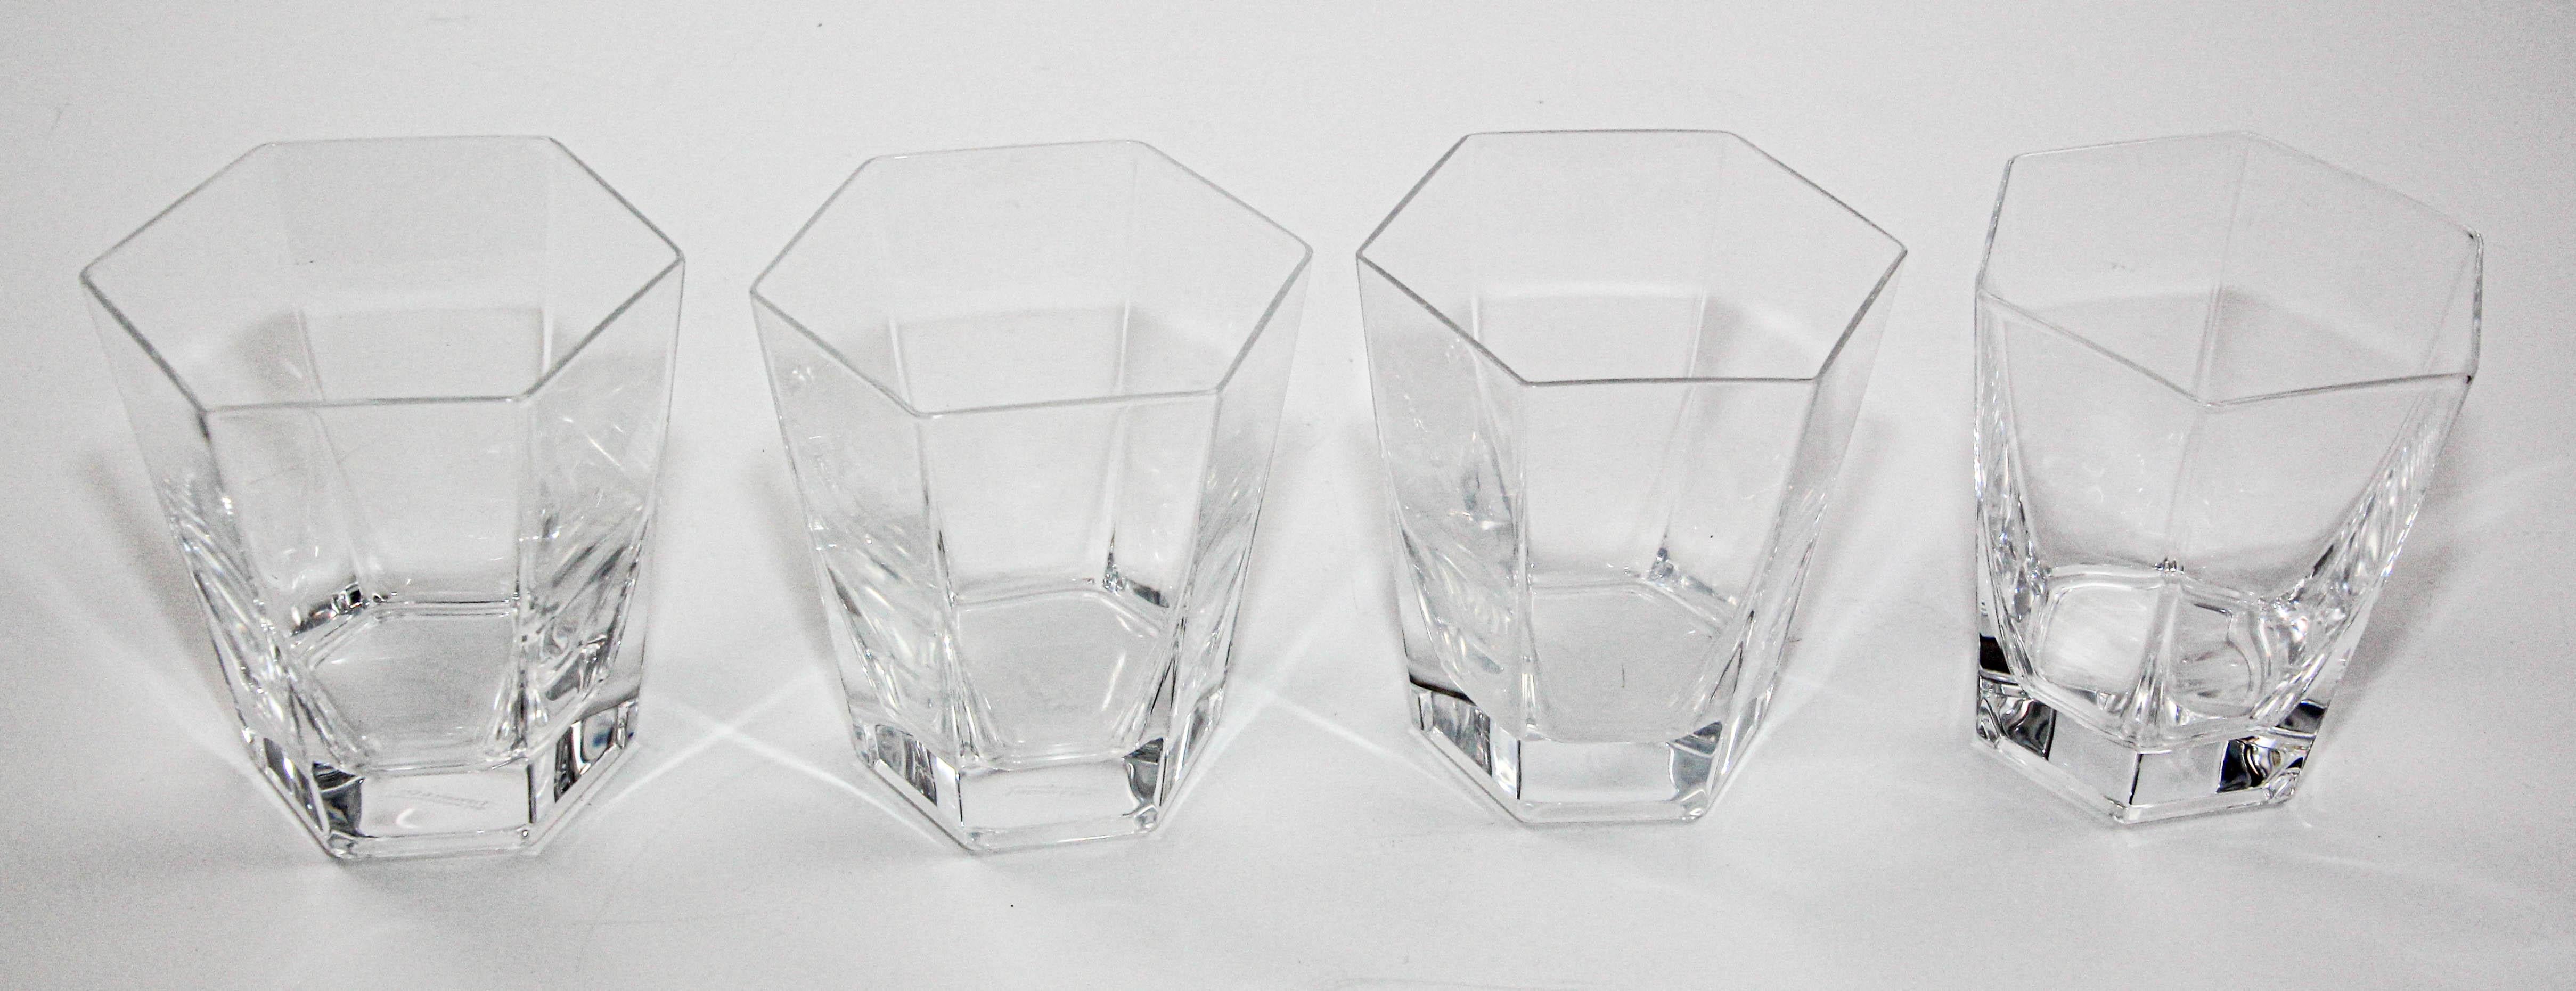 Frank Lloyd Wright by TIFFANY Crystal Old Fashioned Glasses Barware set of 4 In Good Condition For Sale In North Hollywood, CA